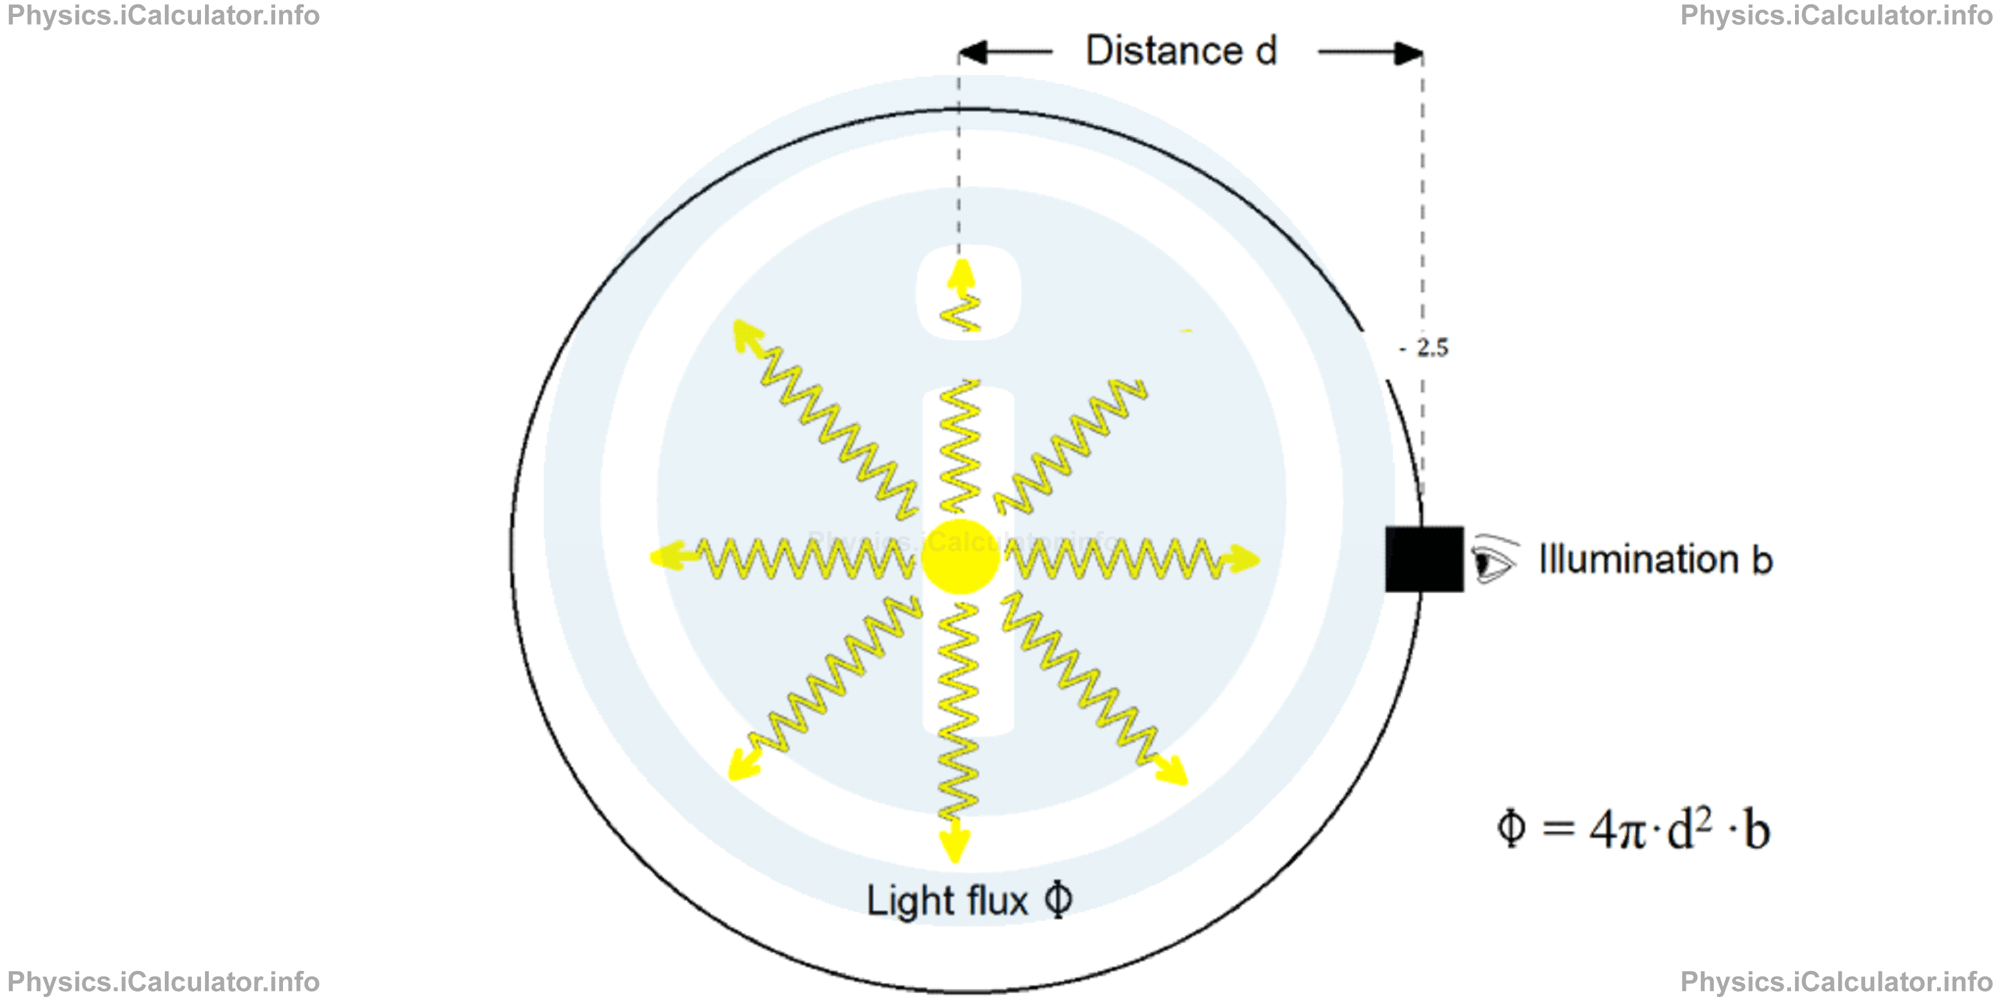 Physics Tutorials: This image provides visual information for the physics tutorial Stars 